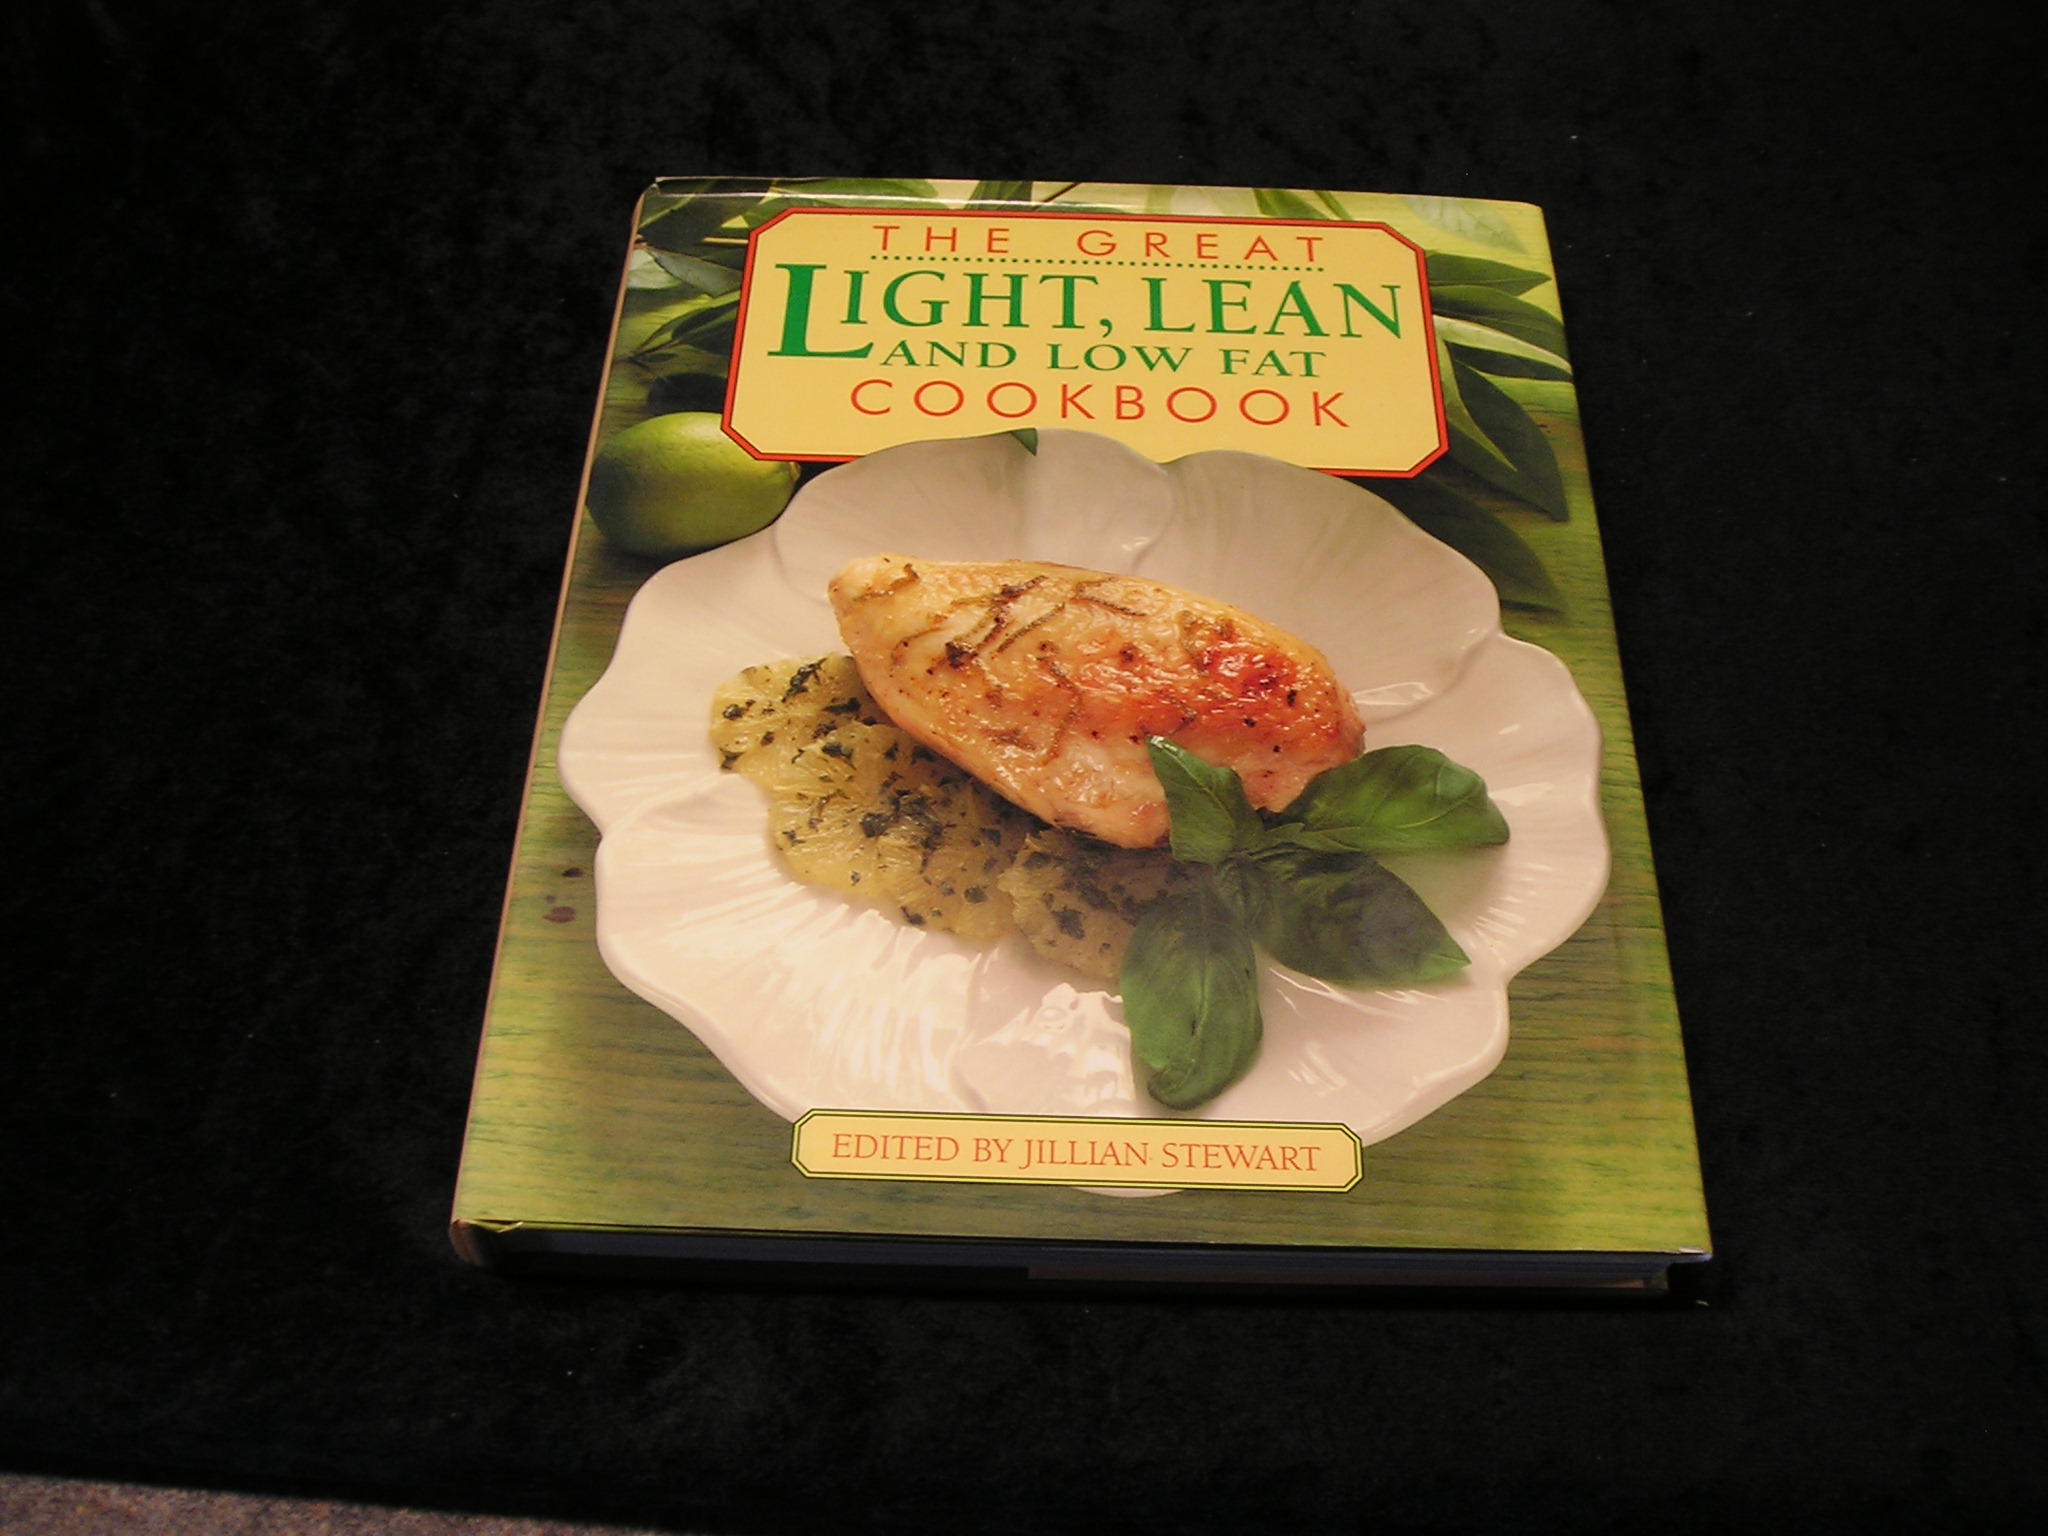 Image 0 of The Green Light Lean and Low Fat Cookbook